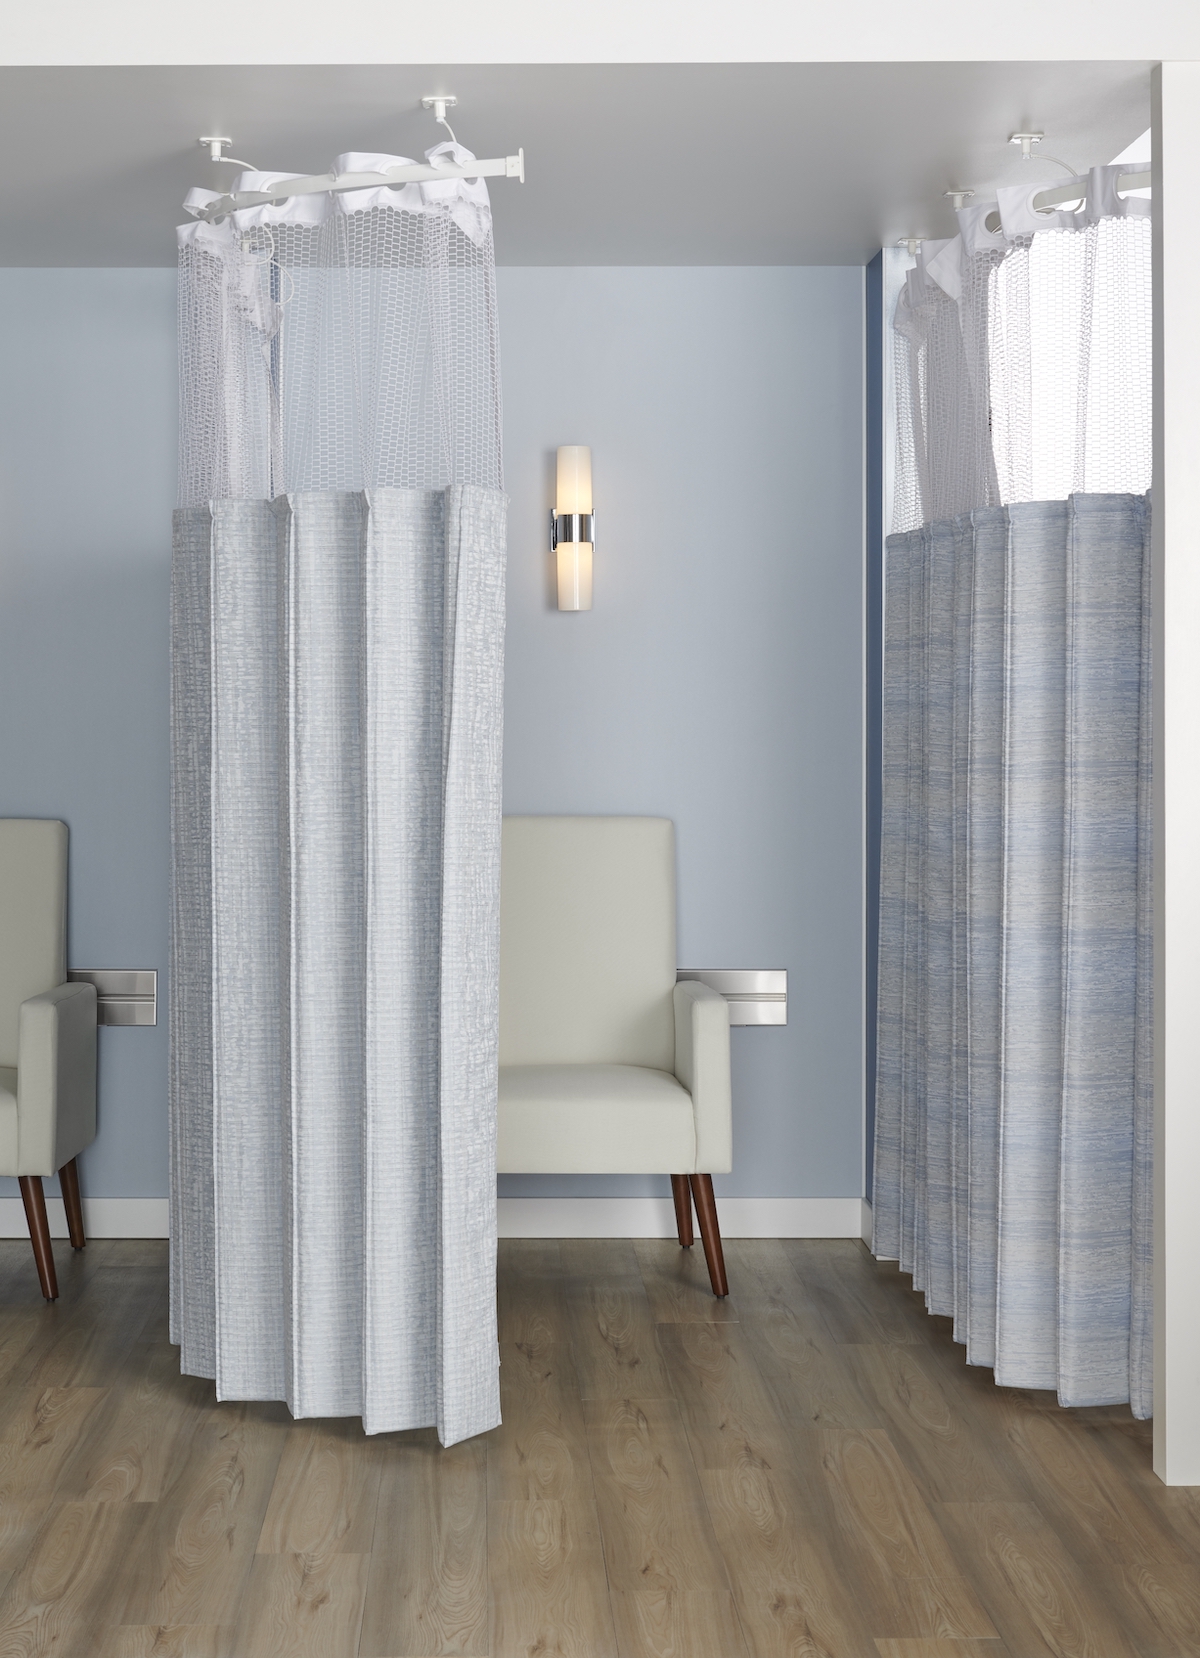 CSelect Cubicle Curtain Fabric from Construction Specialties Healthcare products